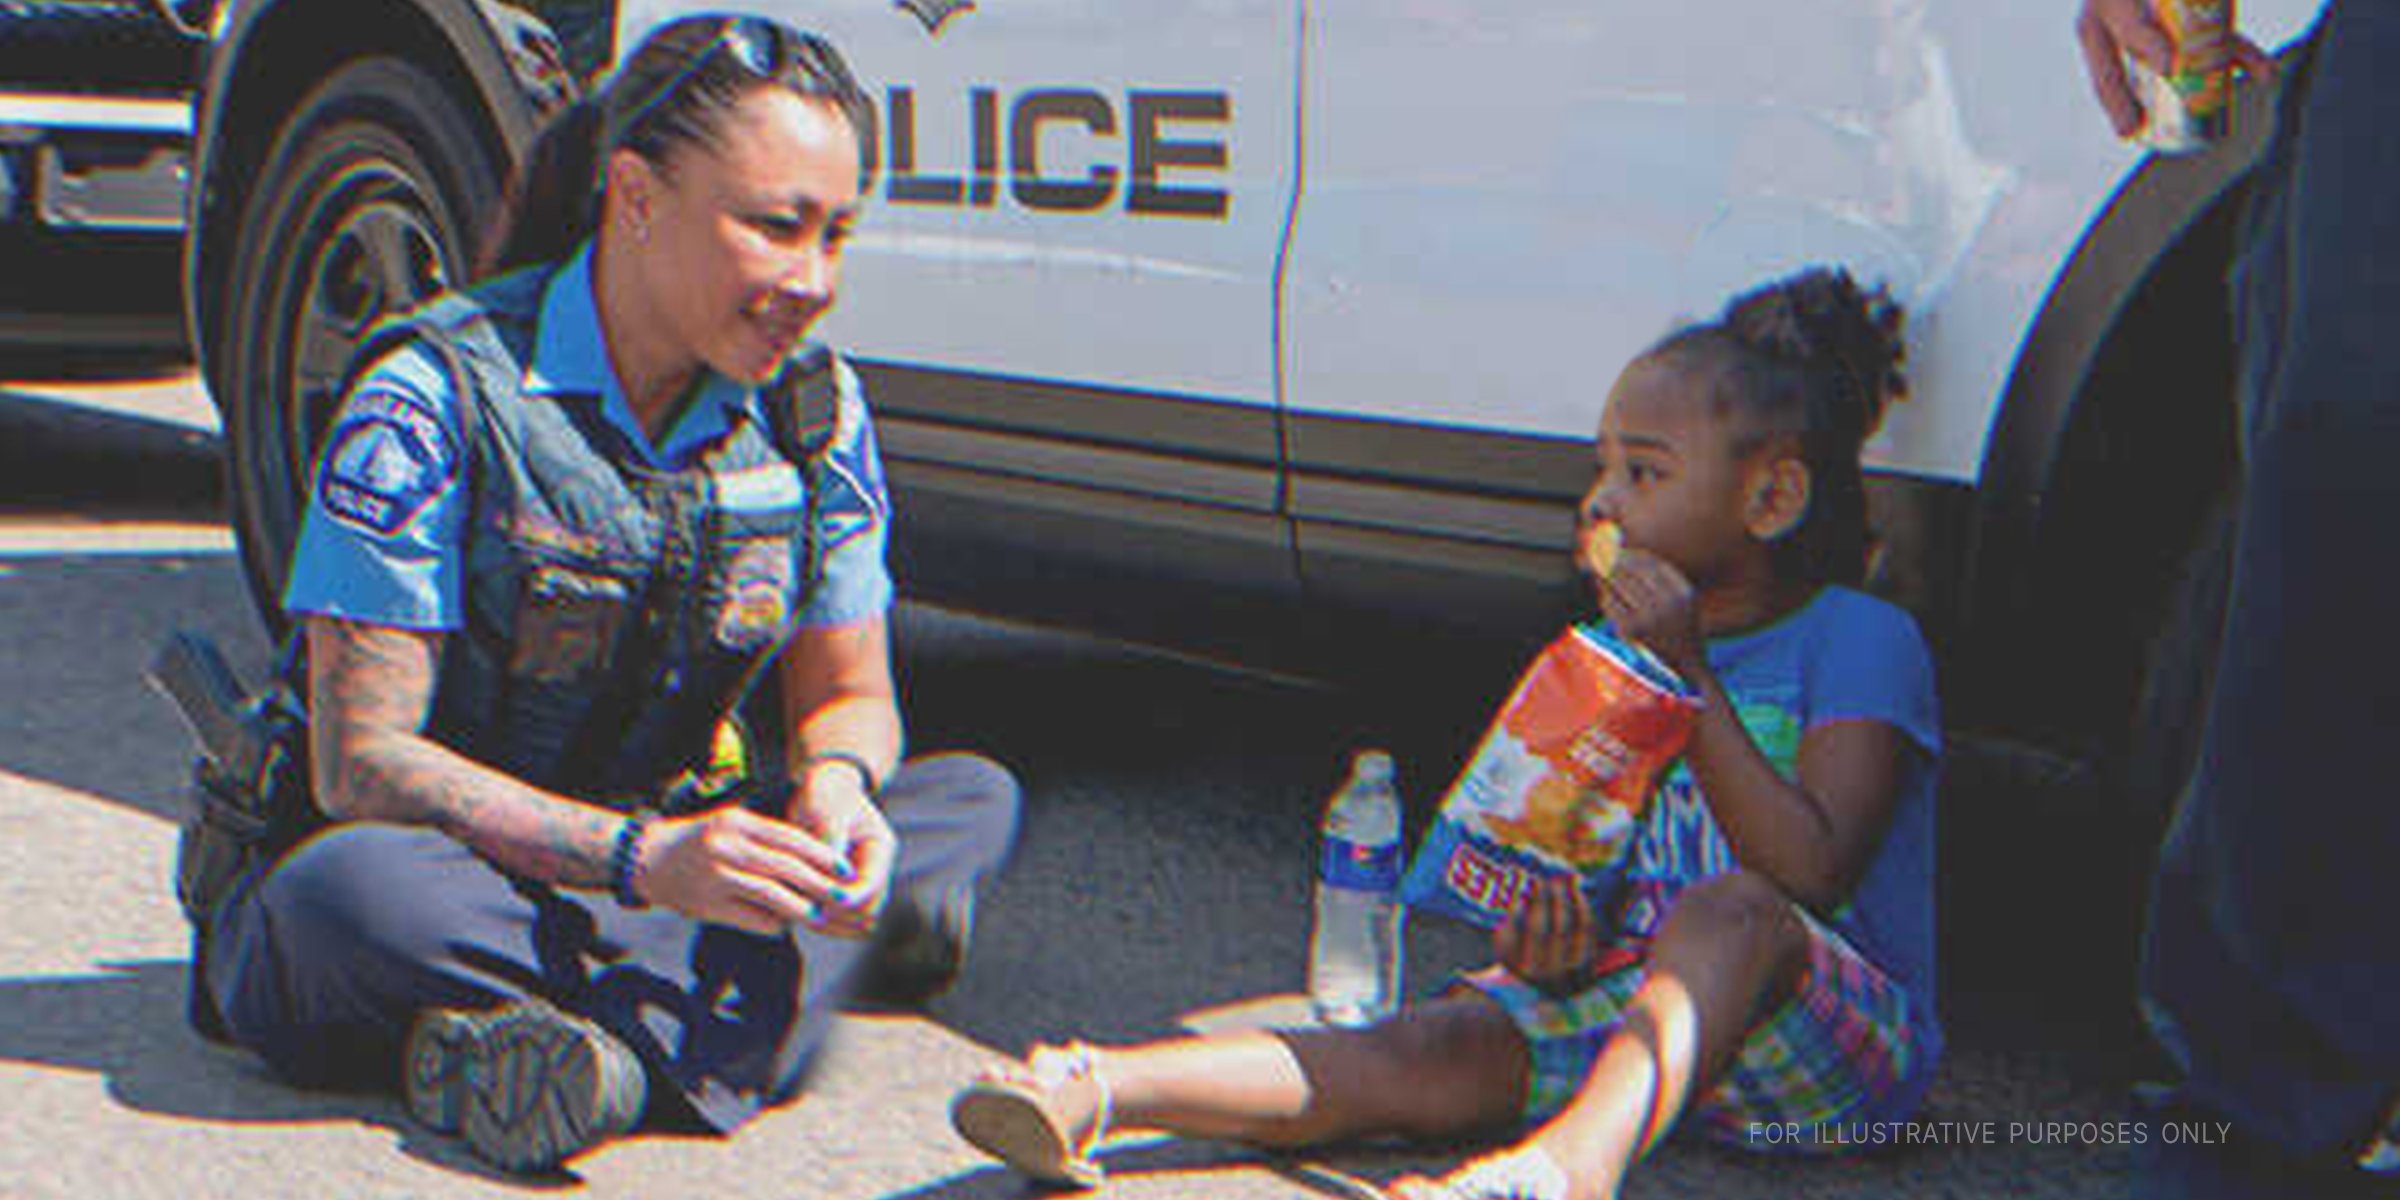 Female cop with a little girl | Source: Shutterstock